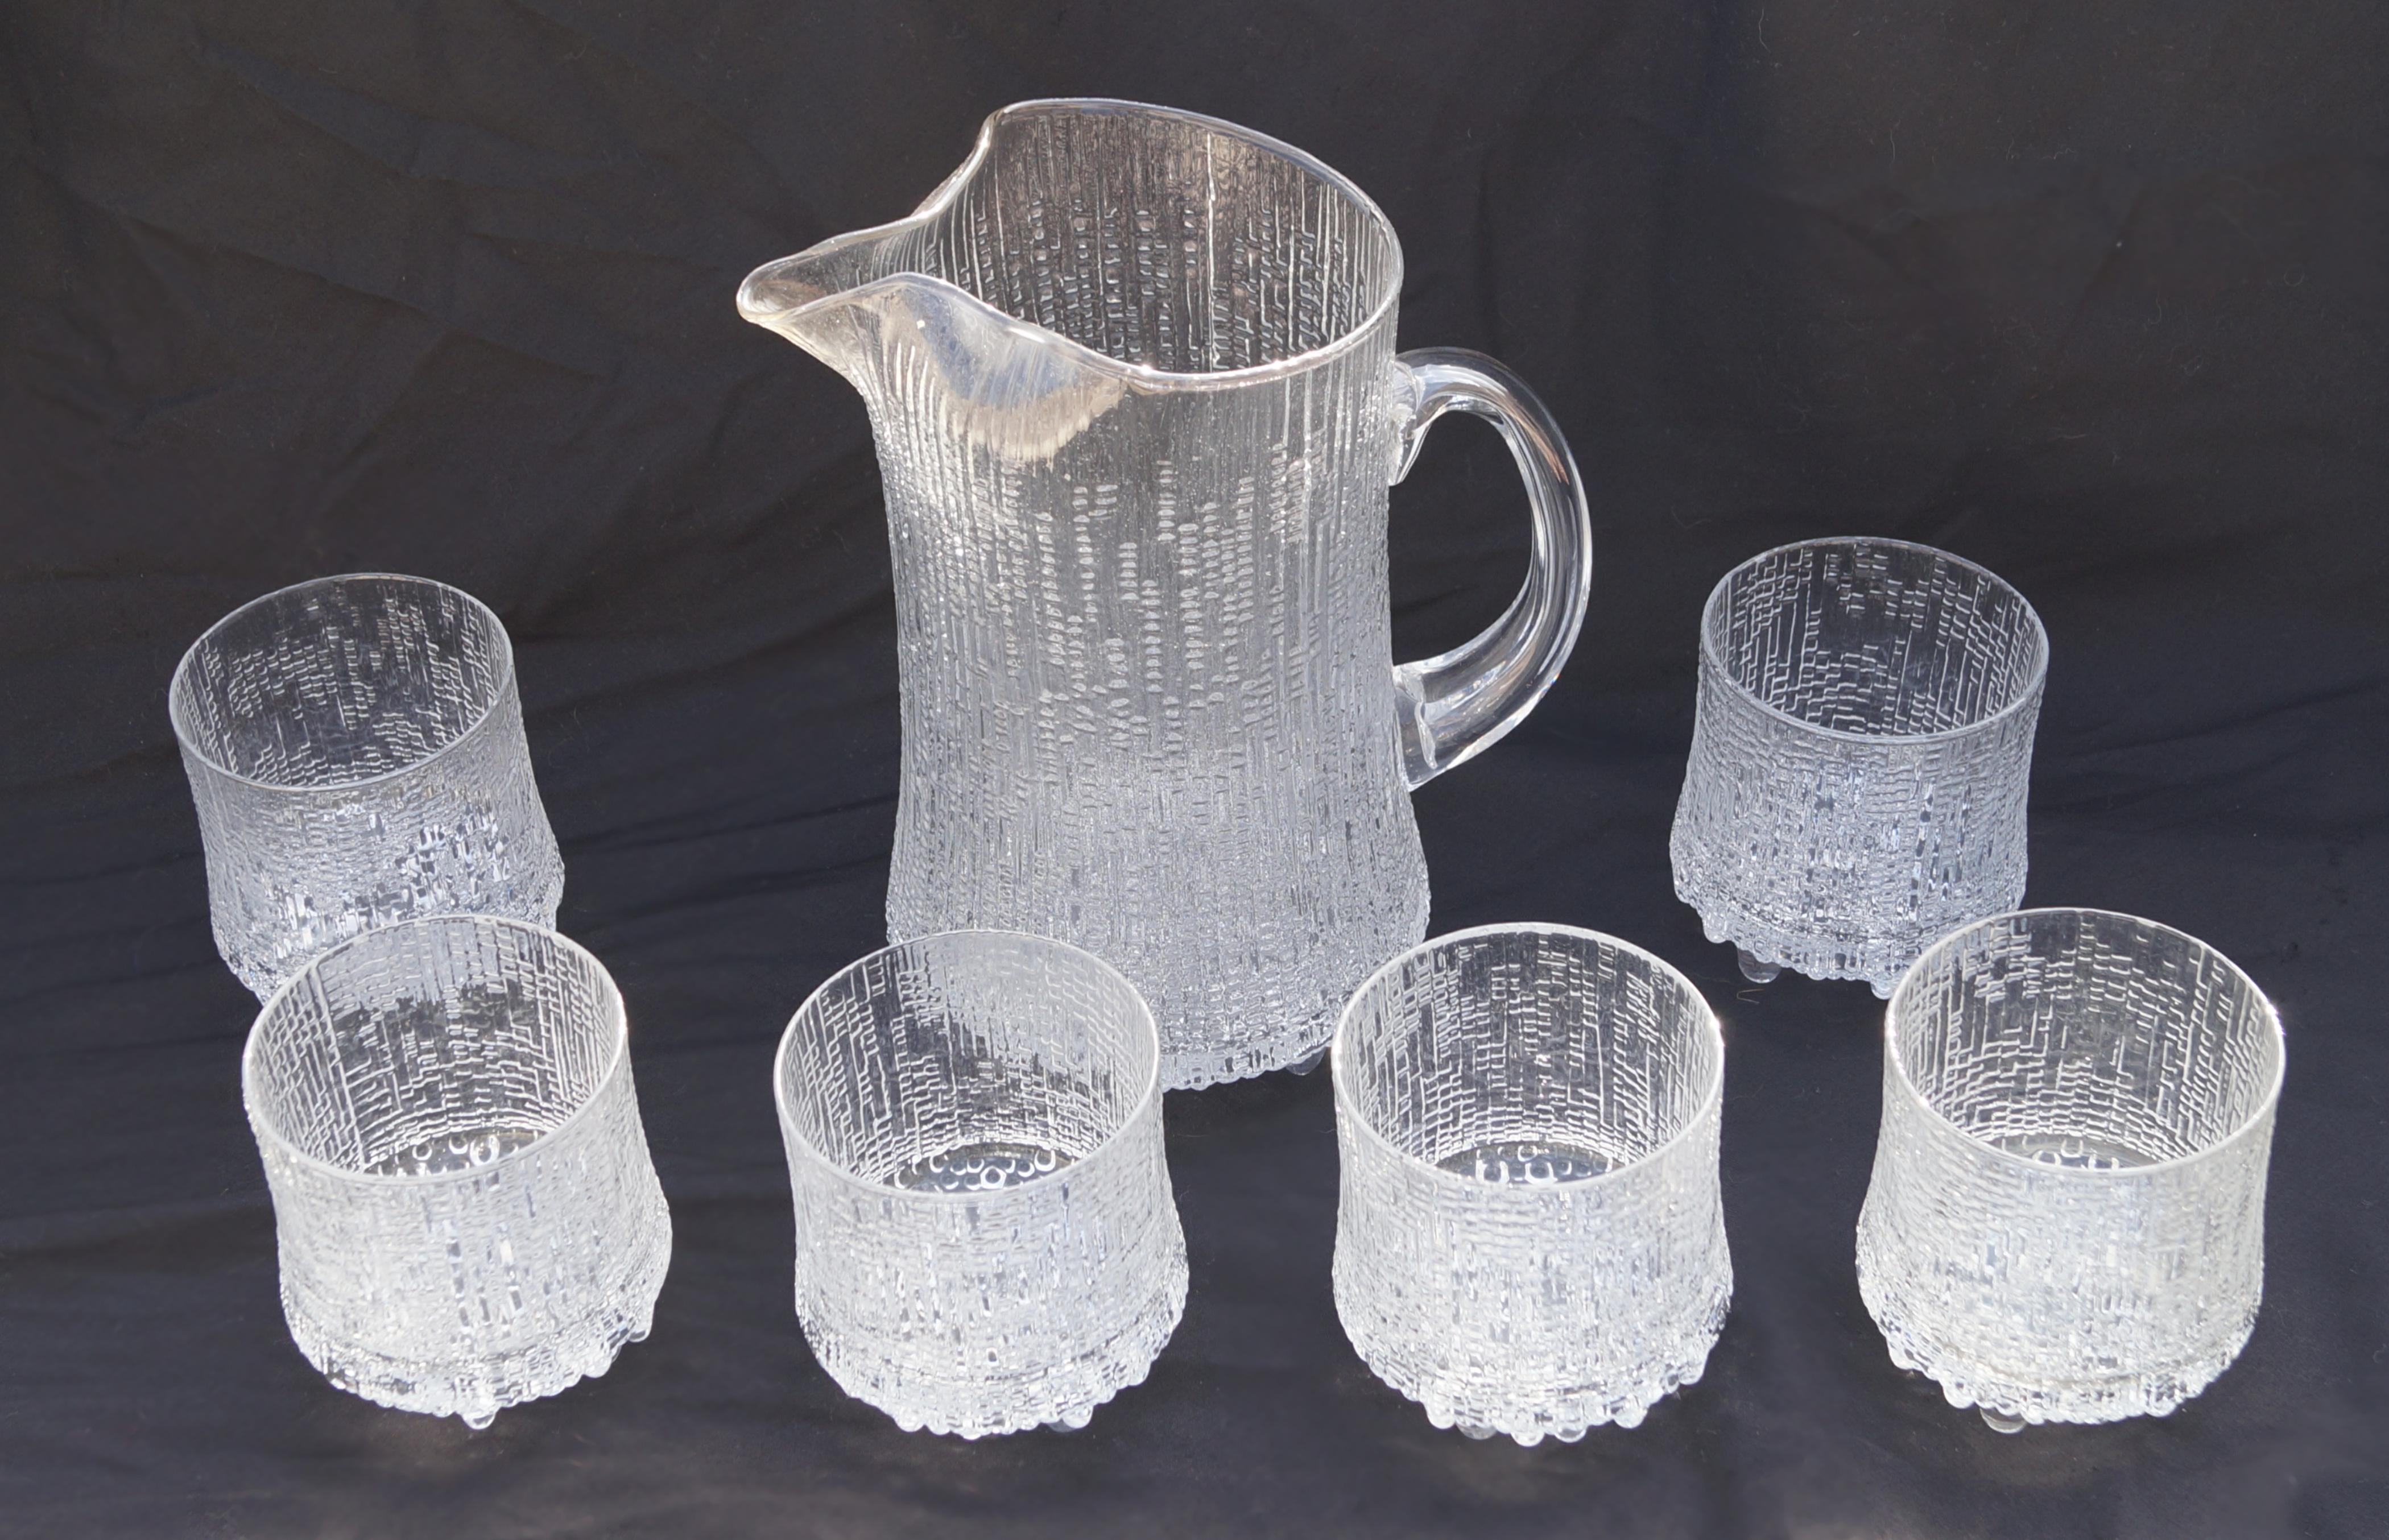 Set of Tapio Wirkkala Ultima Thule Glass Pitcher and 6 Either on the Rocks or Double Old Fashioned Glasses ( measurements are very close on both, so not certain which they are) from Finland the lip is approx 3 1/8